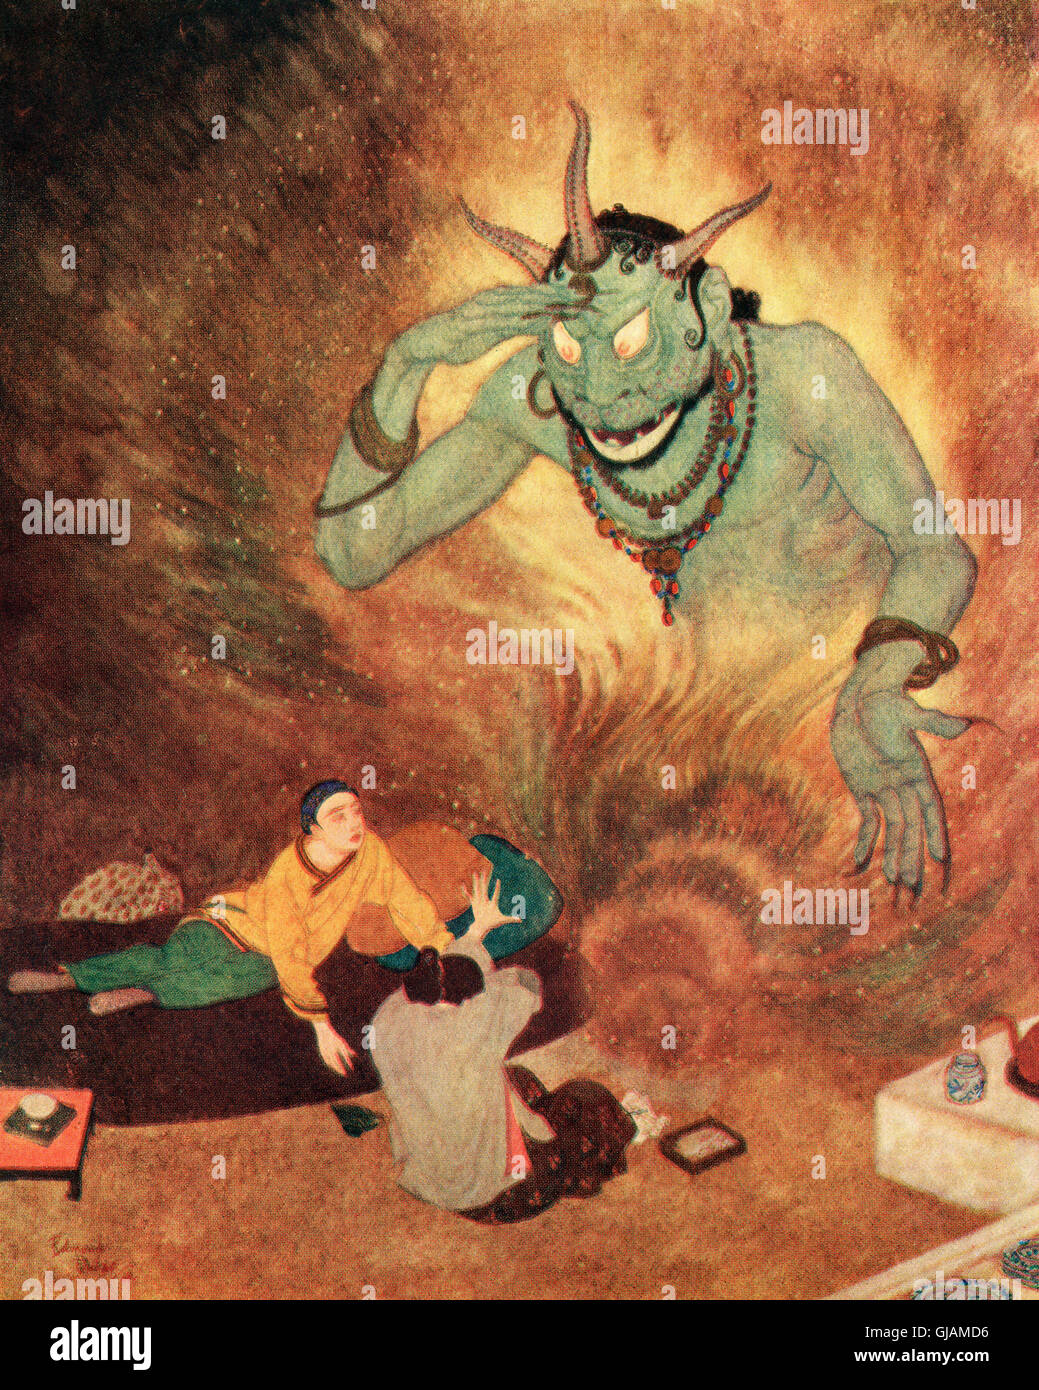 Aladdin and the Efrite.  Illustration by Edmund Dulac for Aladdin and The Wonderful Lamp. Stock Photo